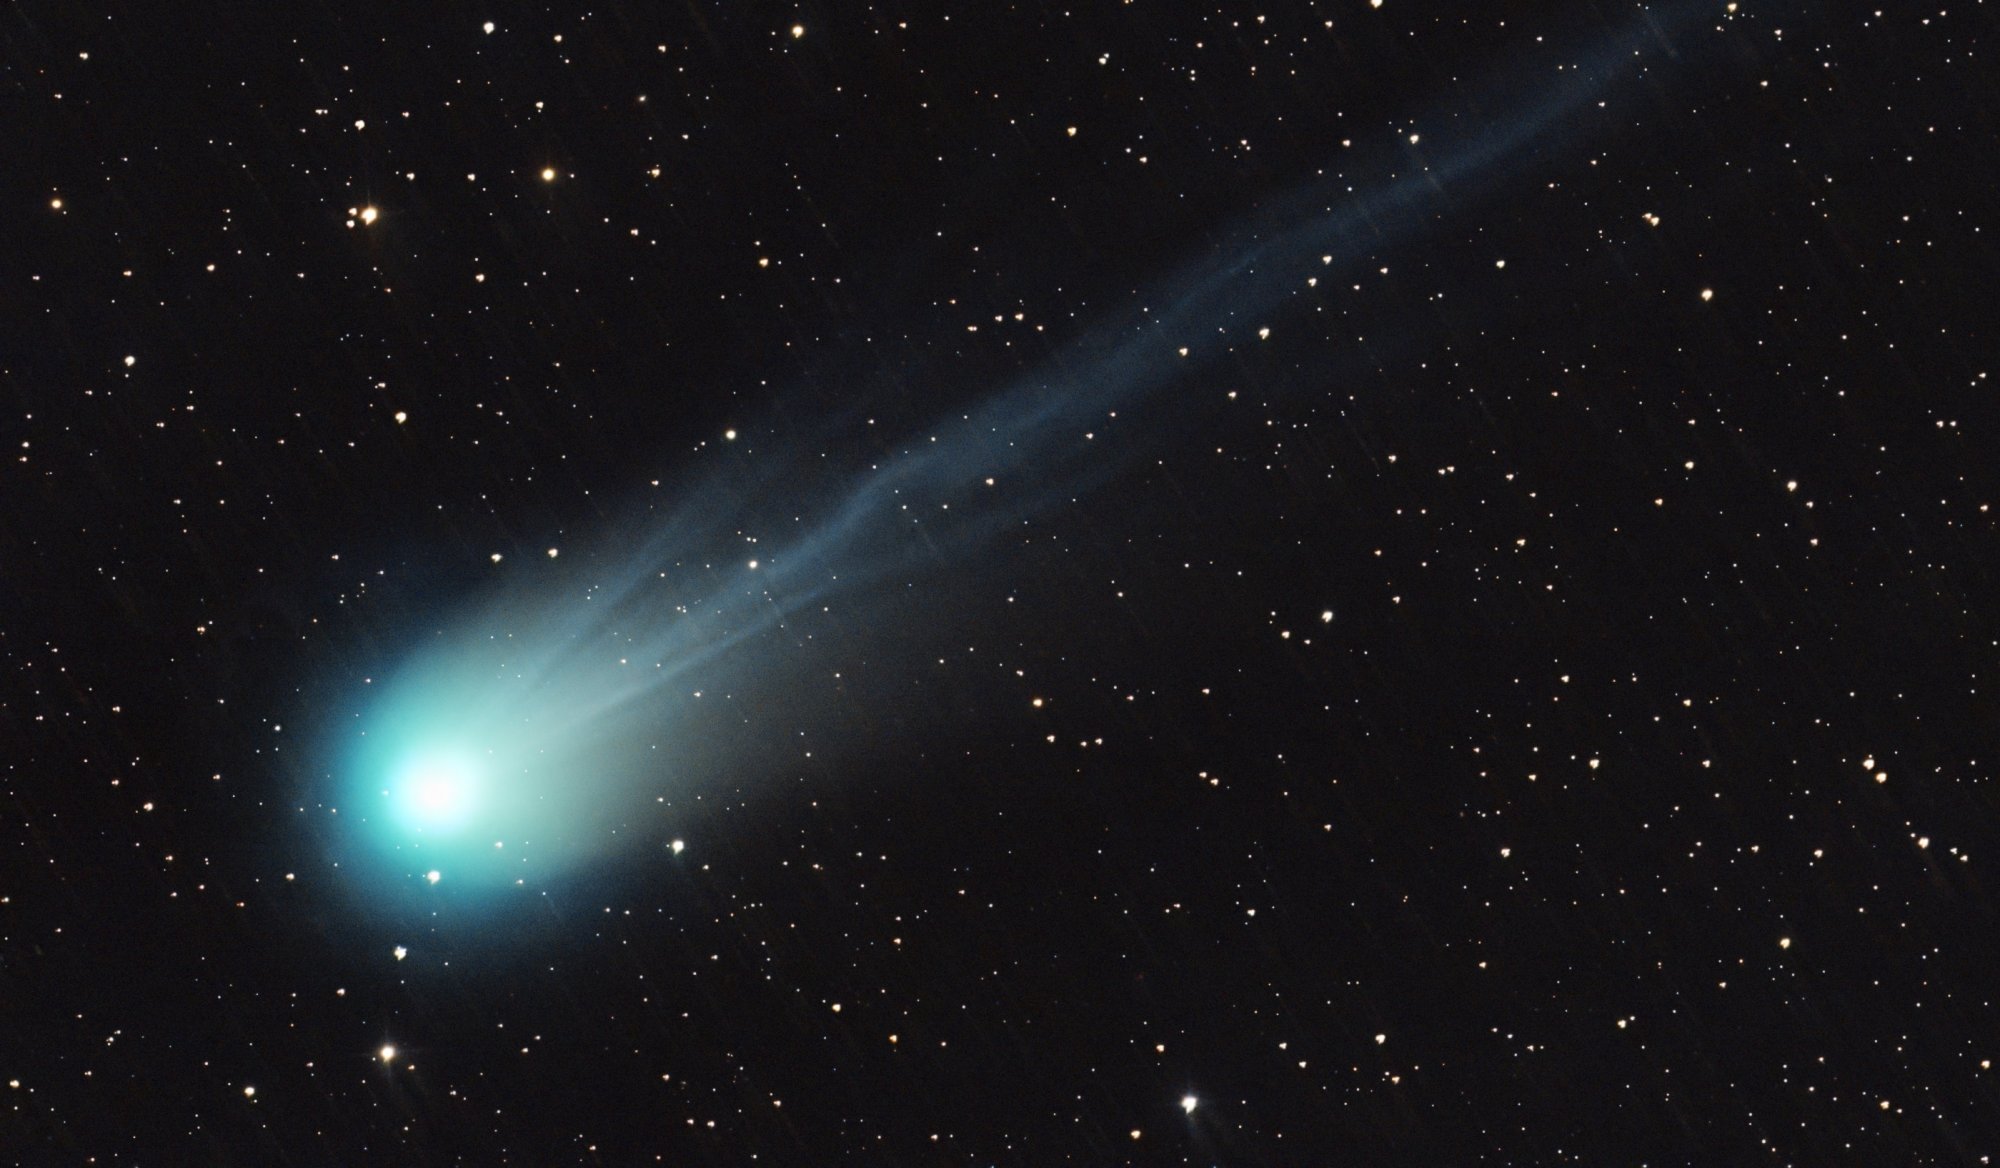 Comet 12P/Pons-Brooks: How you will see it as it approaches the Sun